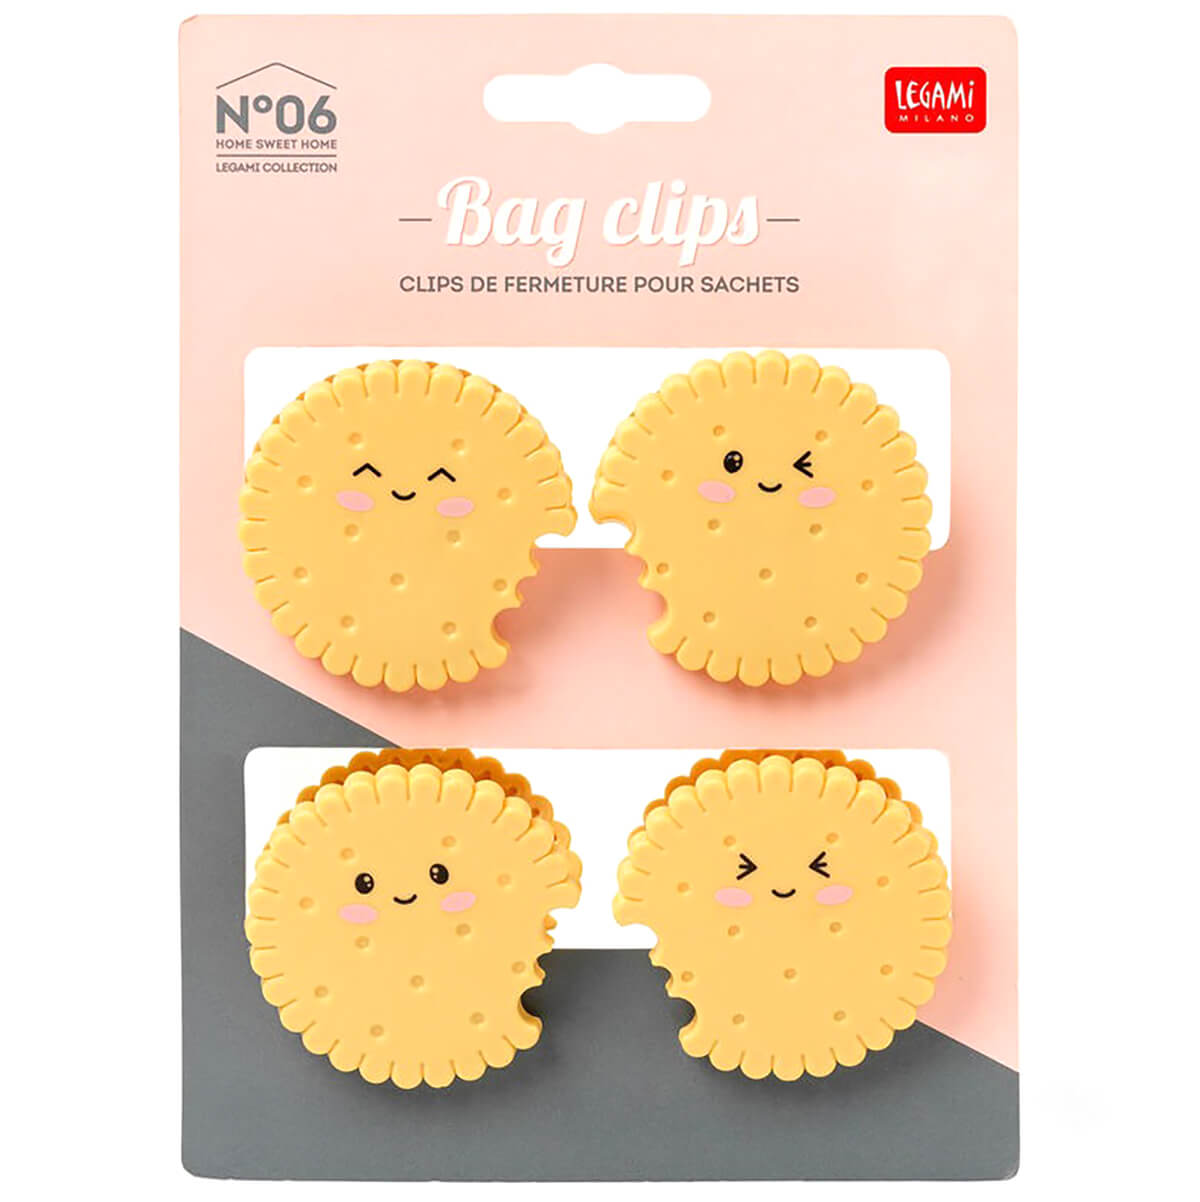 Cookie Set Of Bag Clips by Legami – Junior Edition